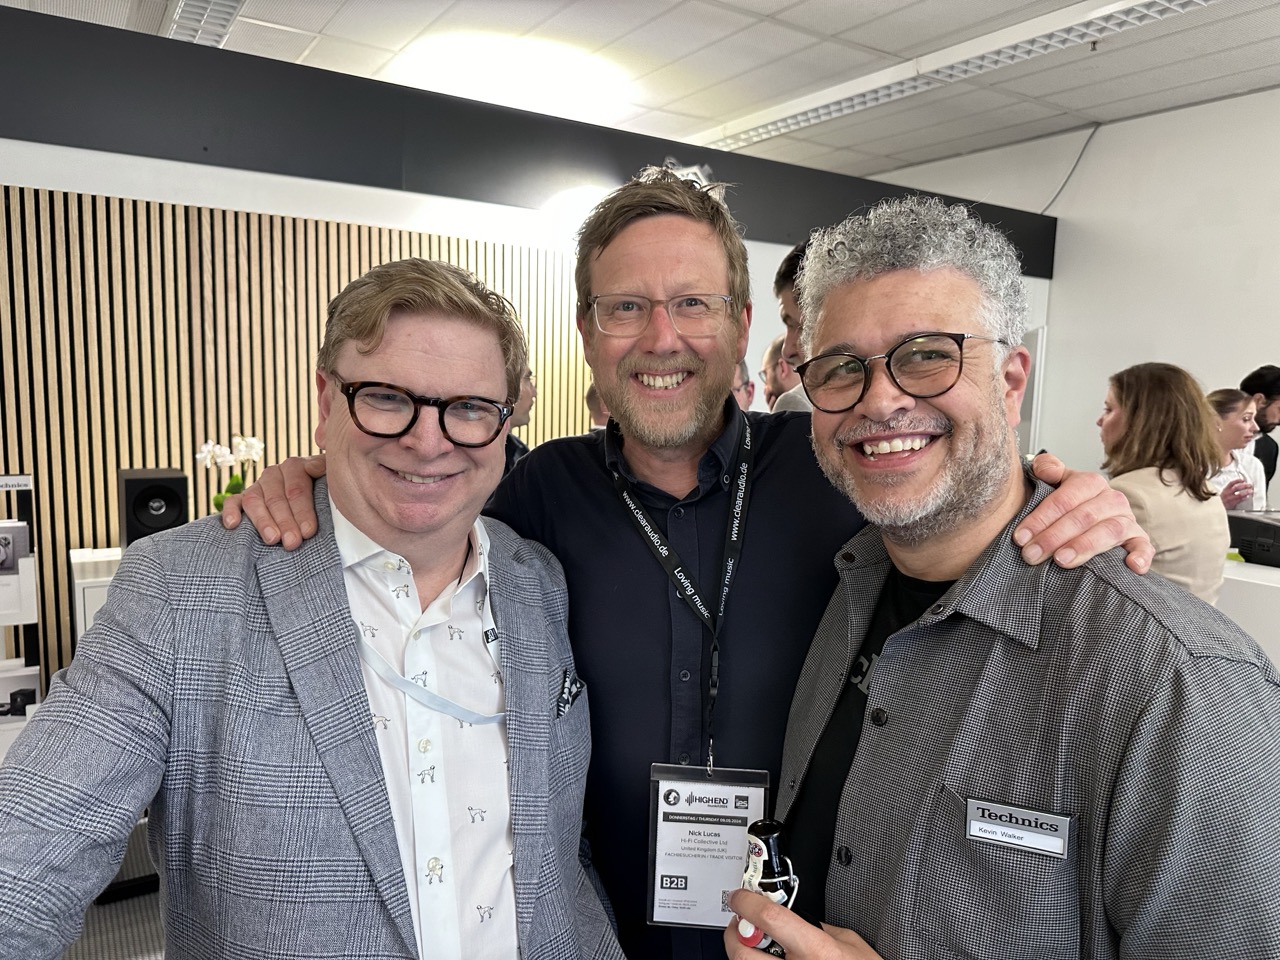 Ran into my old pal Simon Pope, from the Hi-Fi World days and my new pal Kevin. The both work for Technics, so managed to get an invite for drinkies in their showroom after the first day.